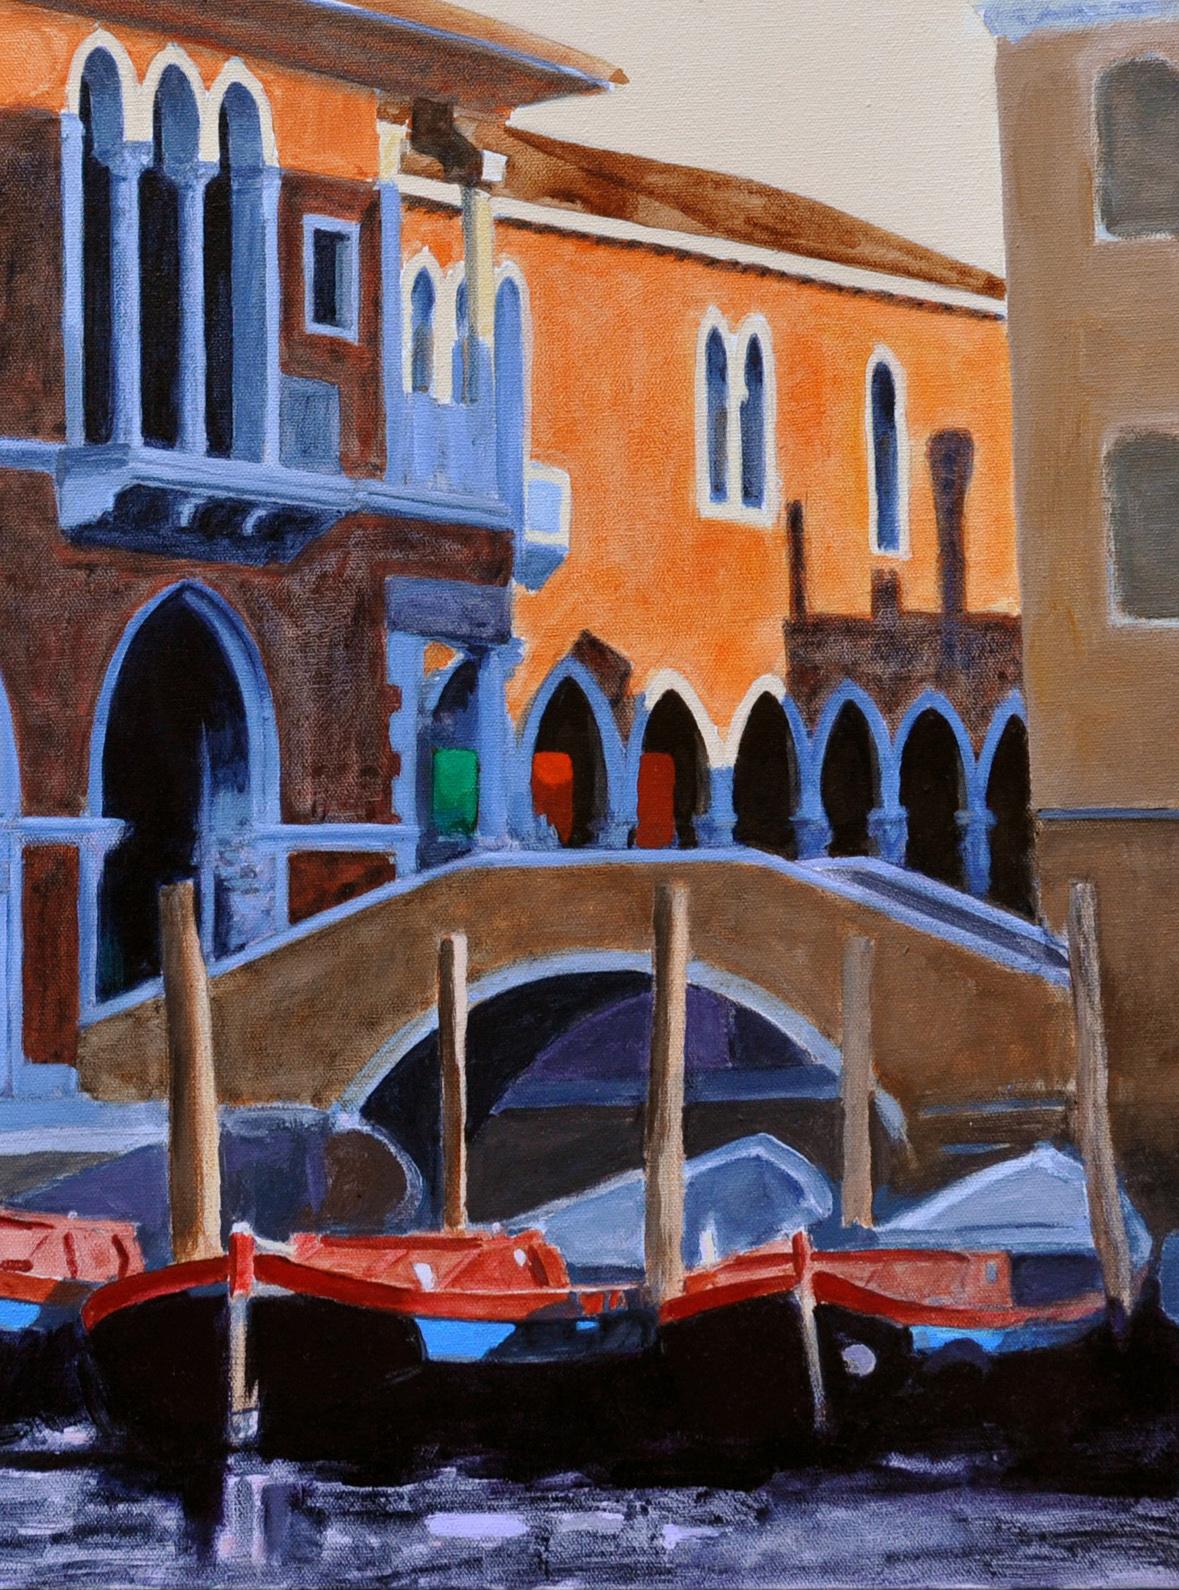 Image for entry 'Grand Canal, Venice'